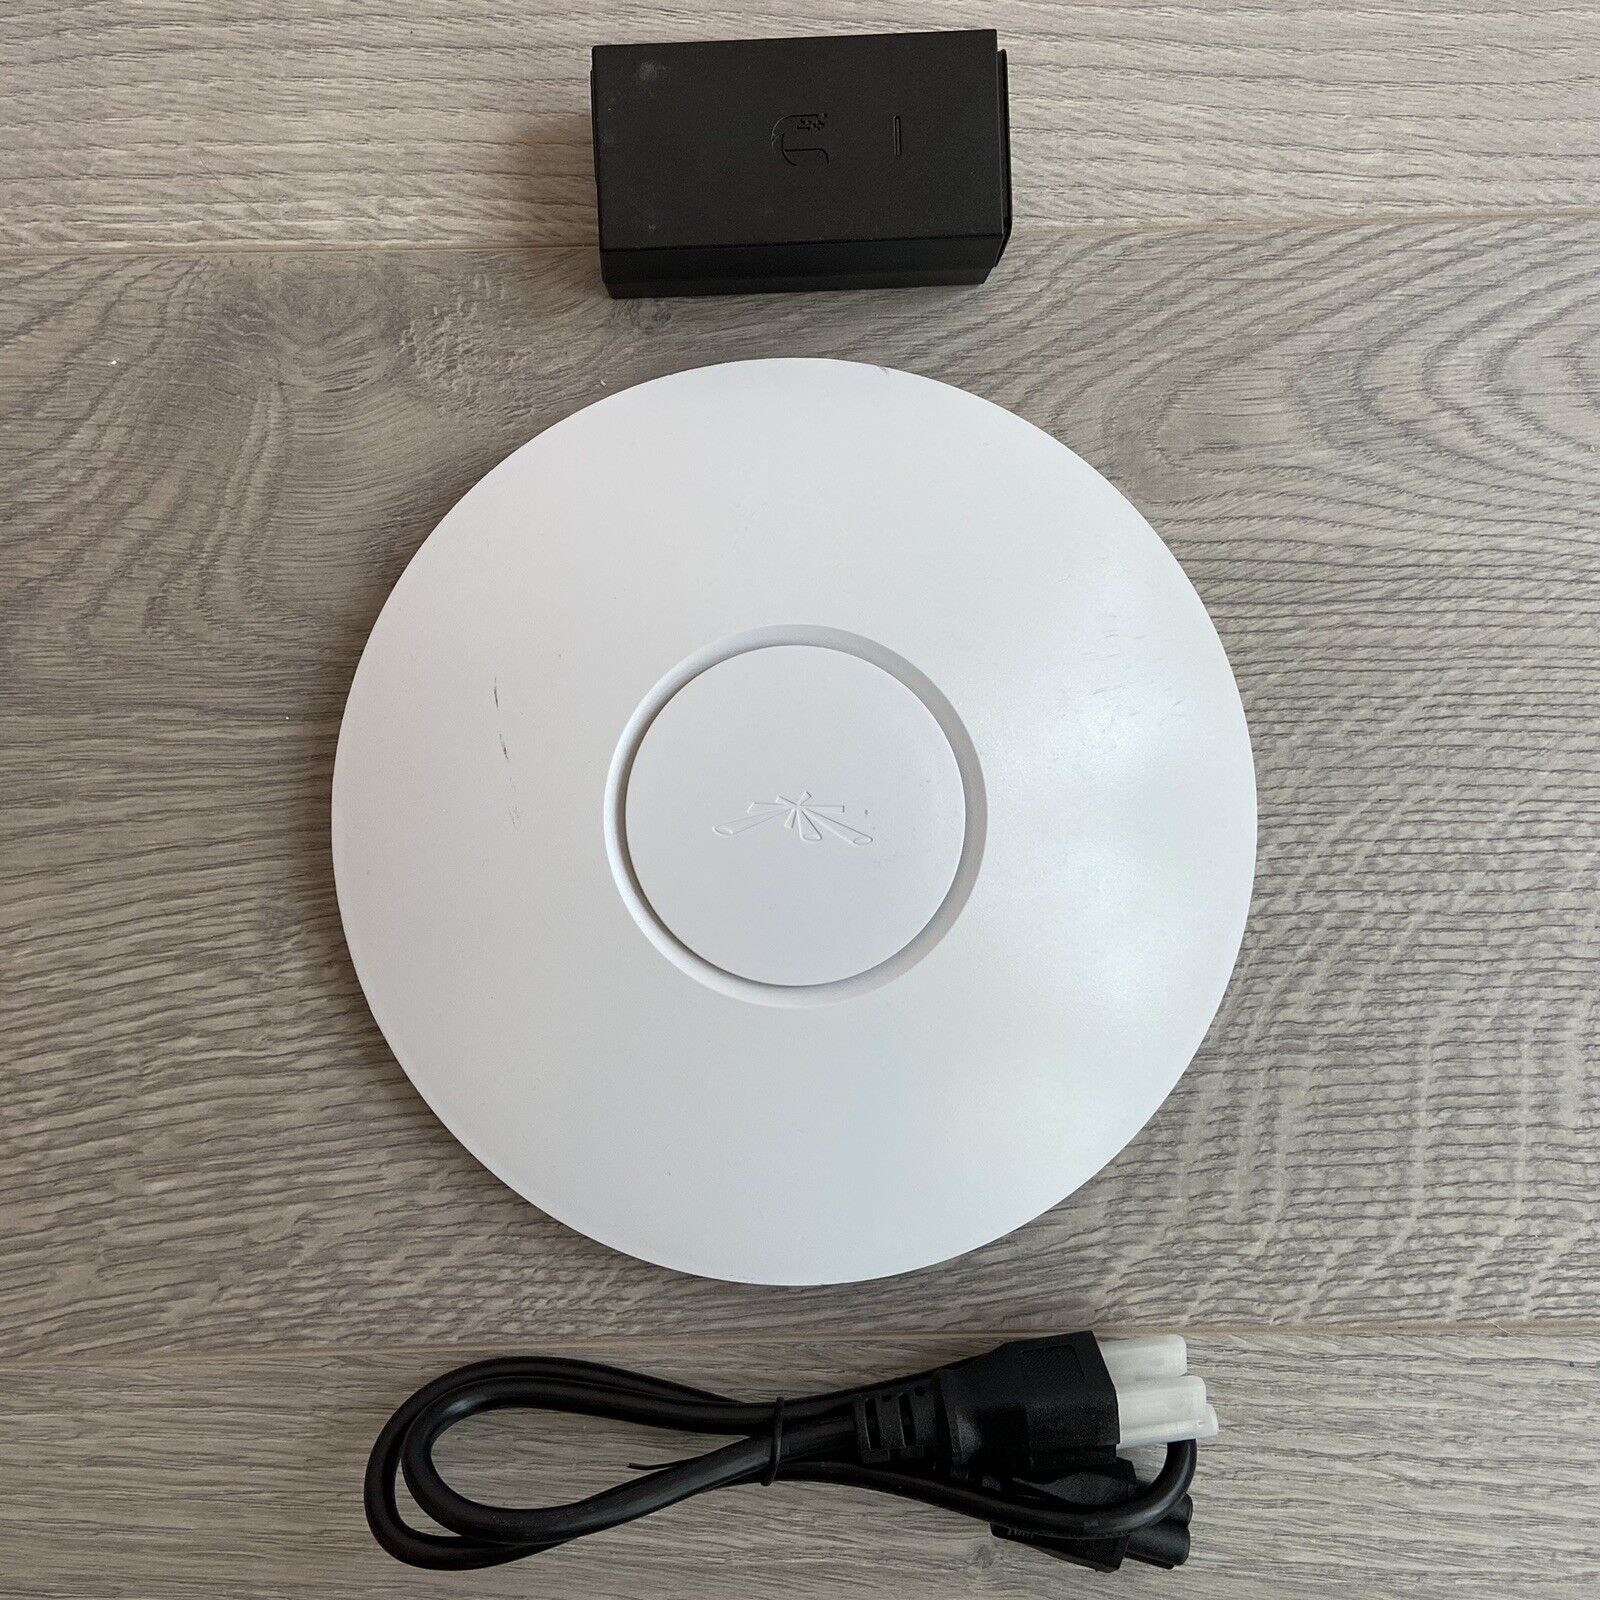 Ubiquiti UniFi AP (UAP) Wireless Access Point Indoor With PoE Injector